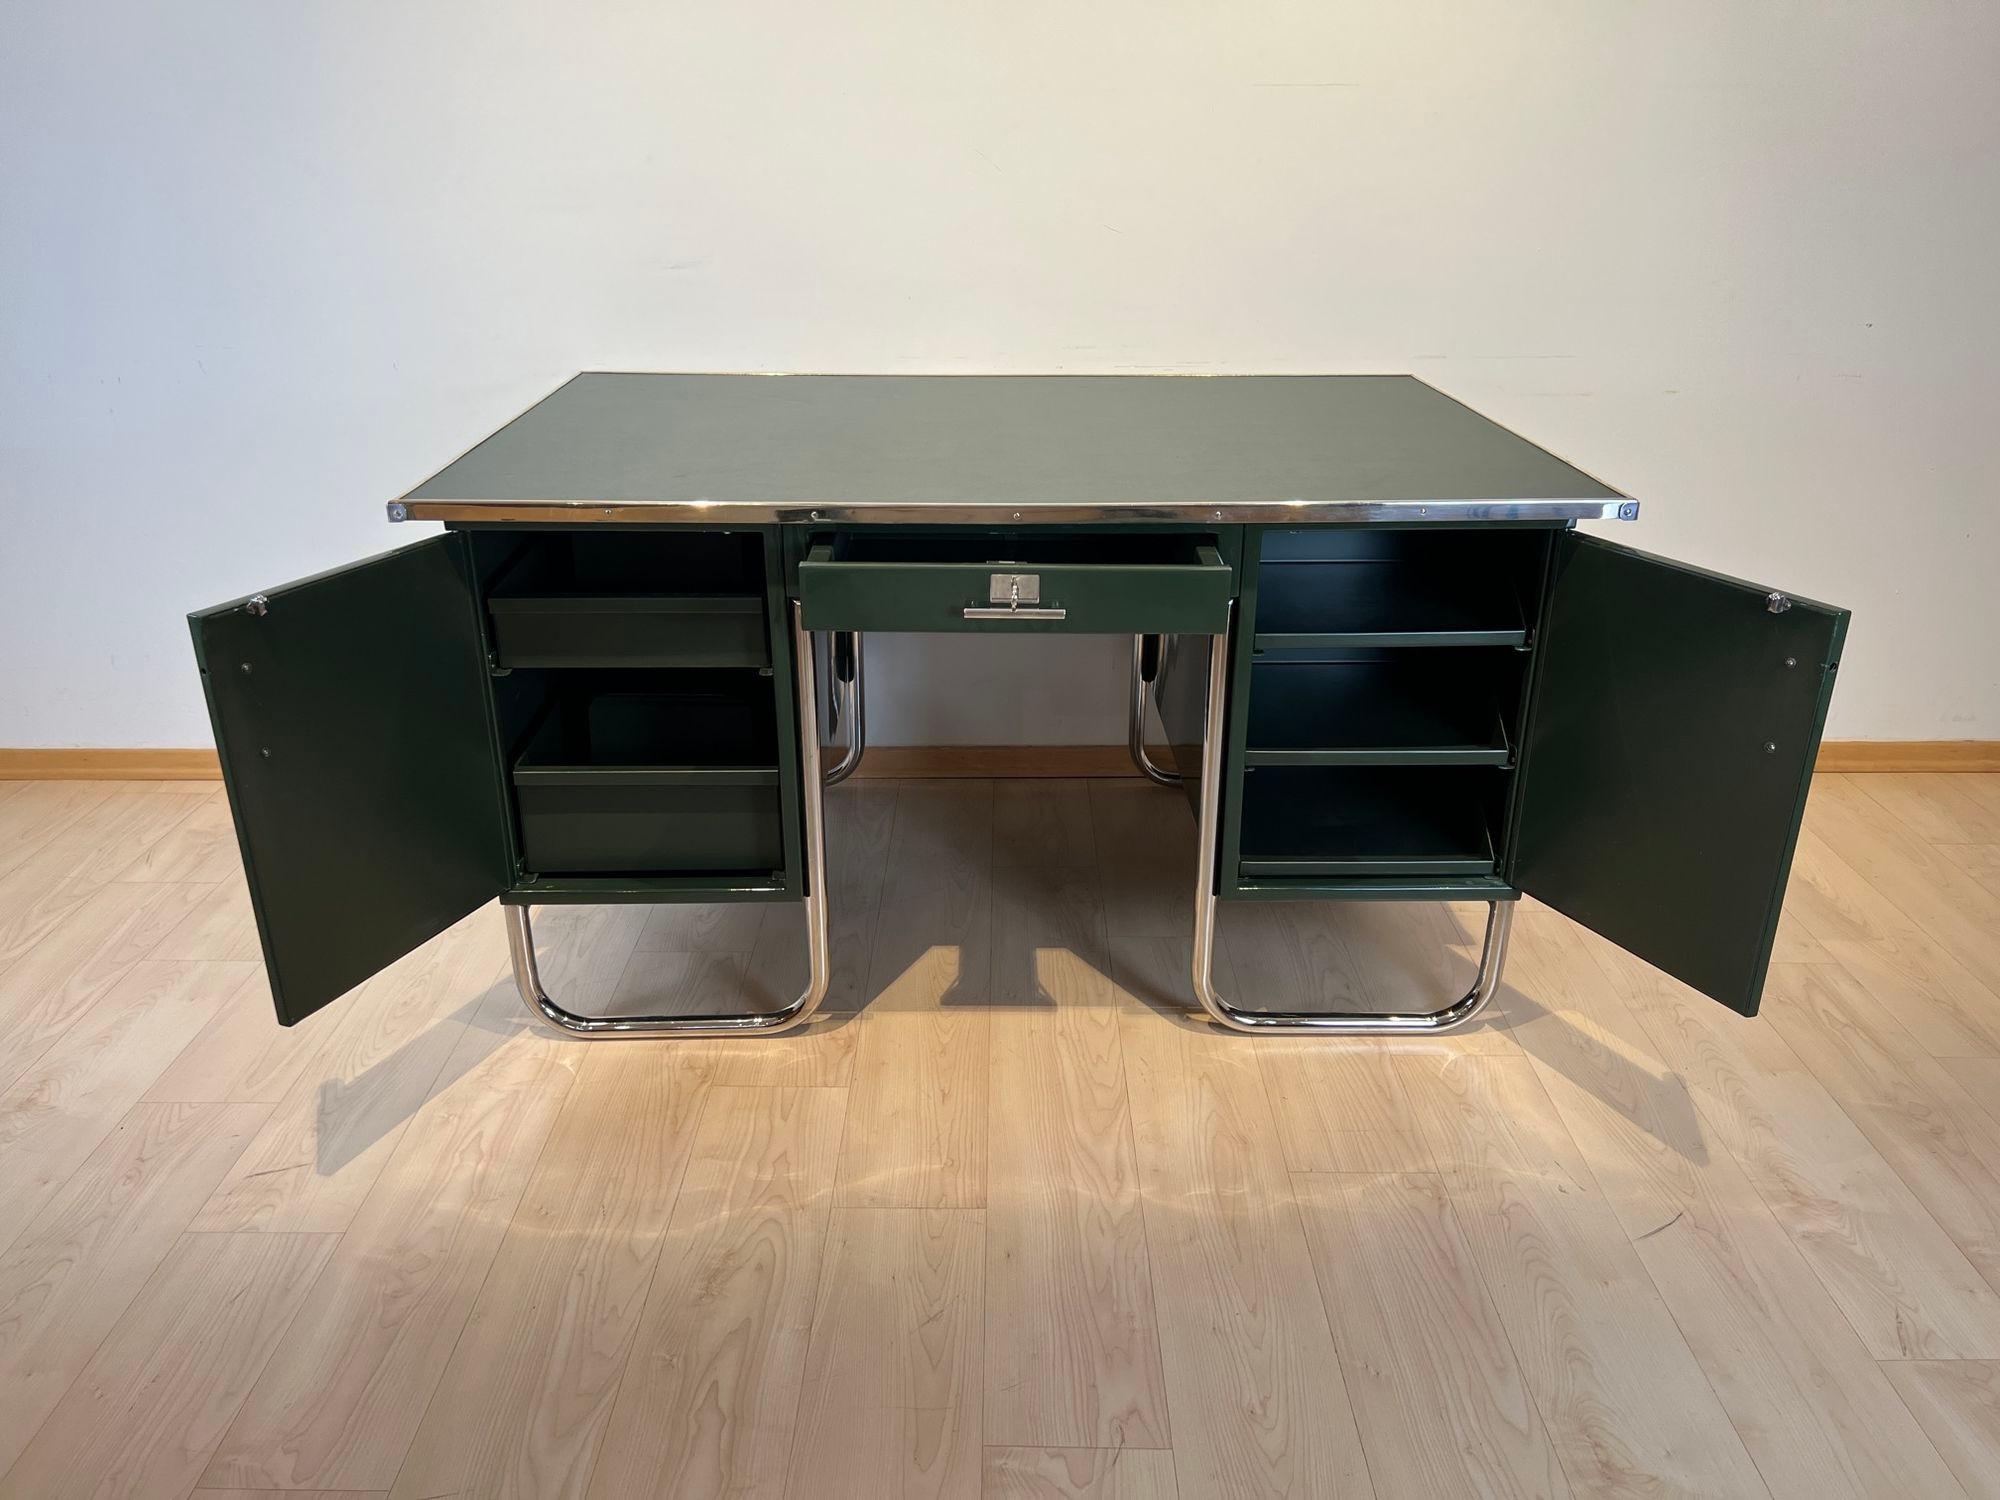 Galvanized Large Bauhaus Partners Desk, Green Lacquer, Metal, Steeltube, Germany circa 1930 For Sale